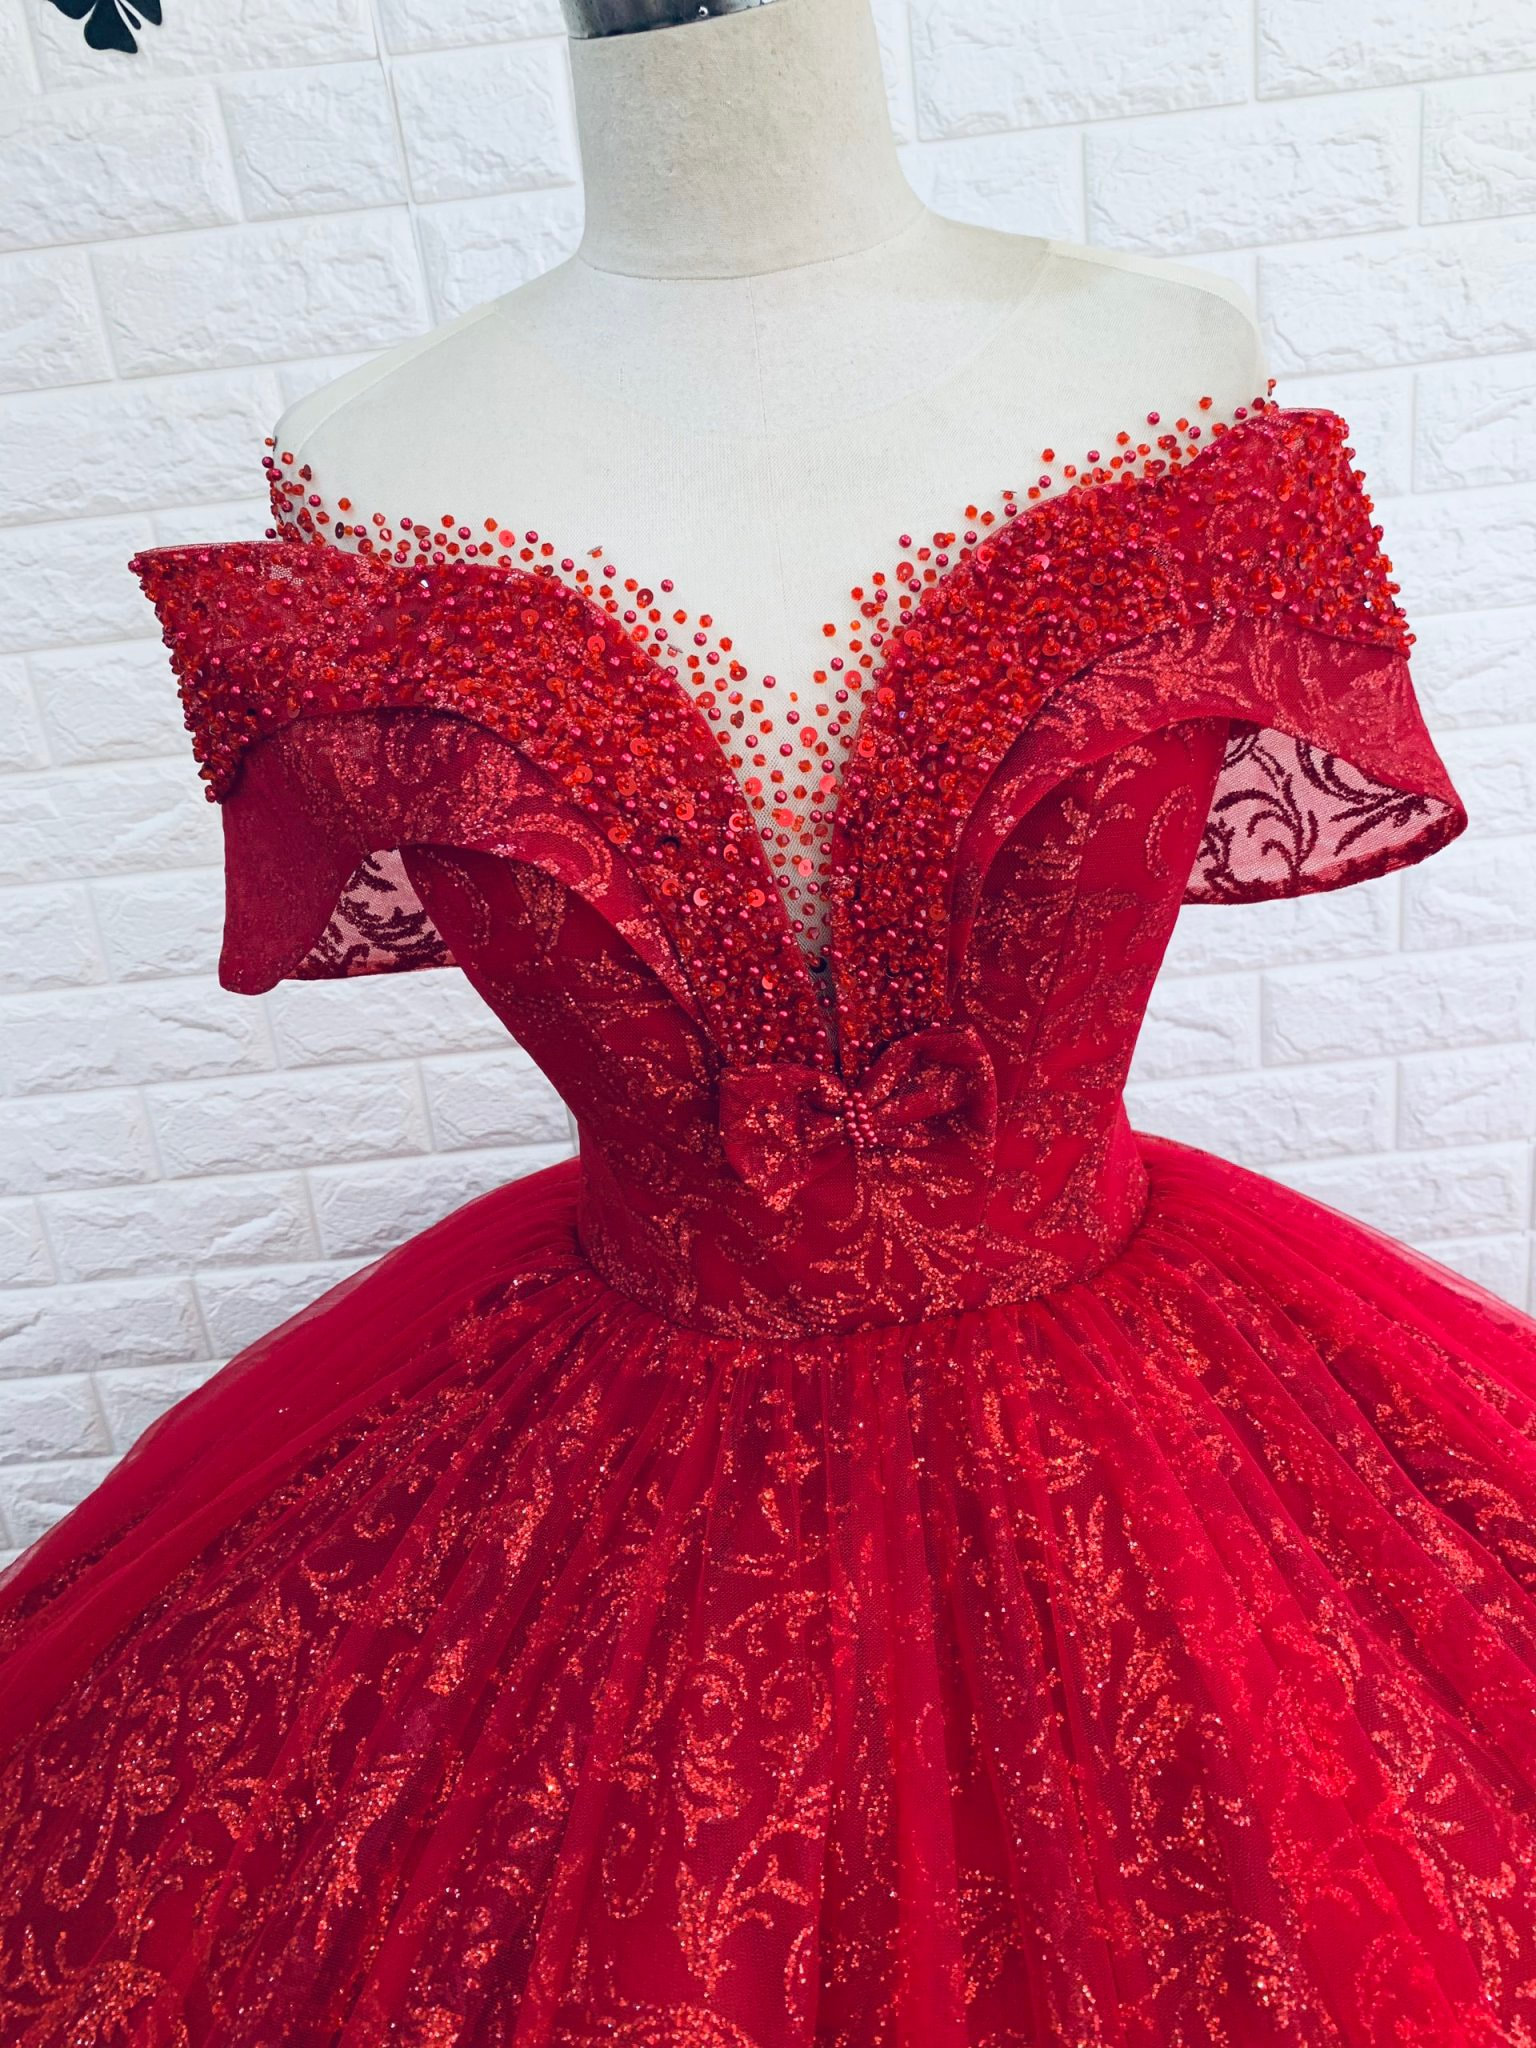 Passion - Queen sleeves red sparkle ball gown wedding dress with beadings, glitter tulle train - various styles